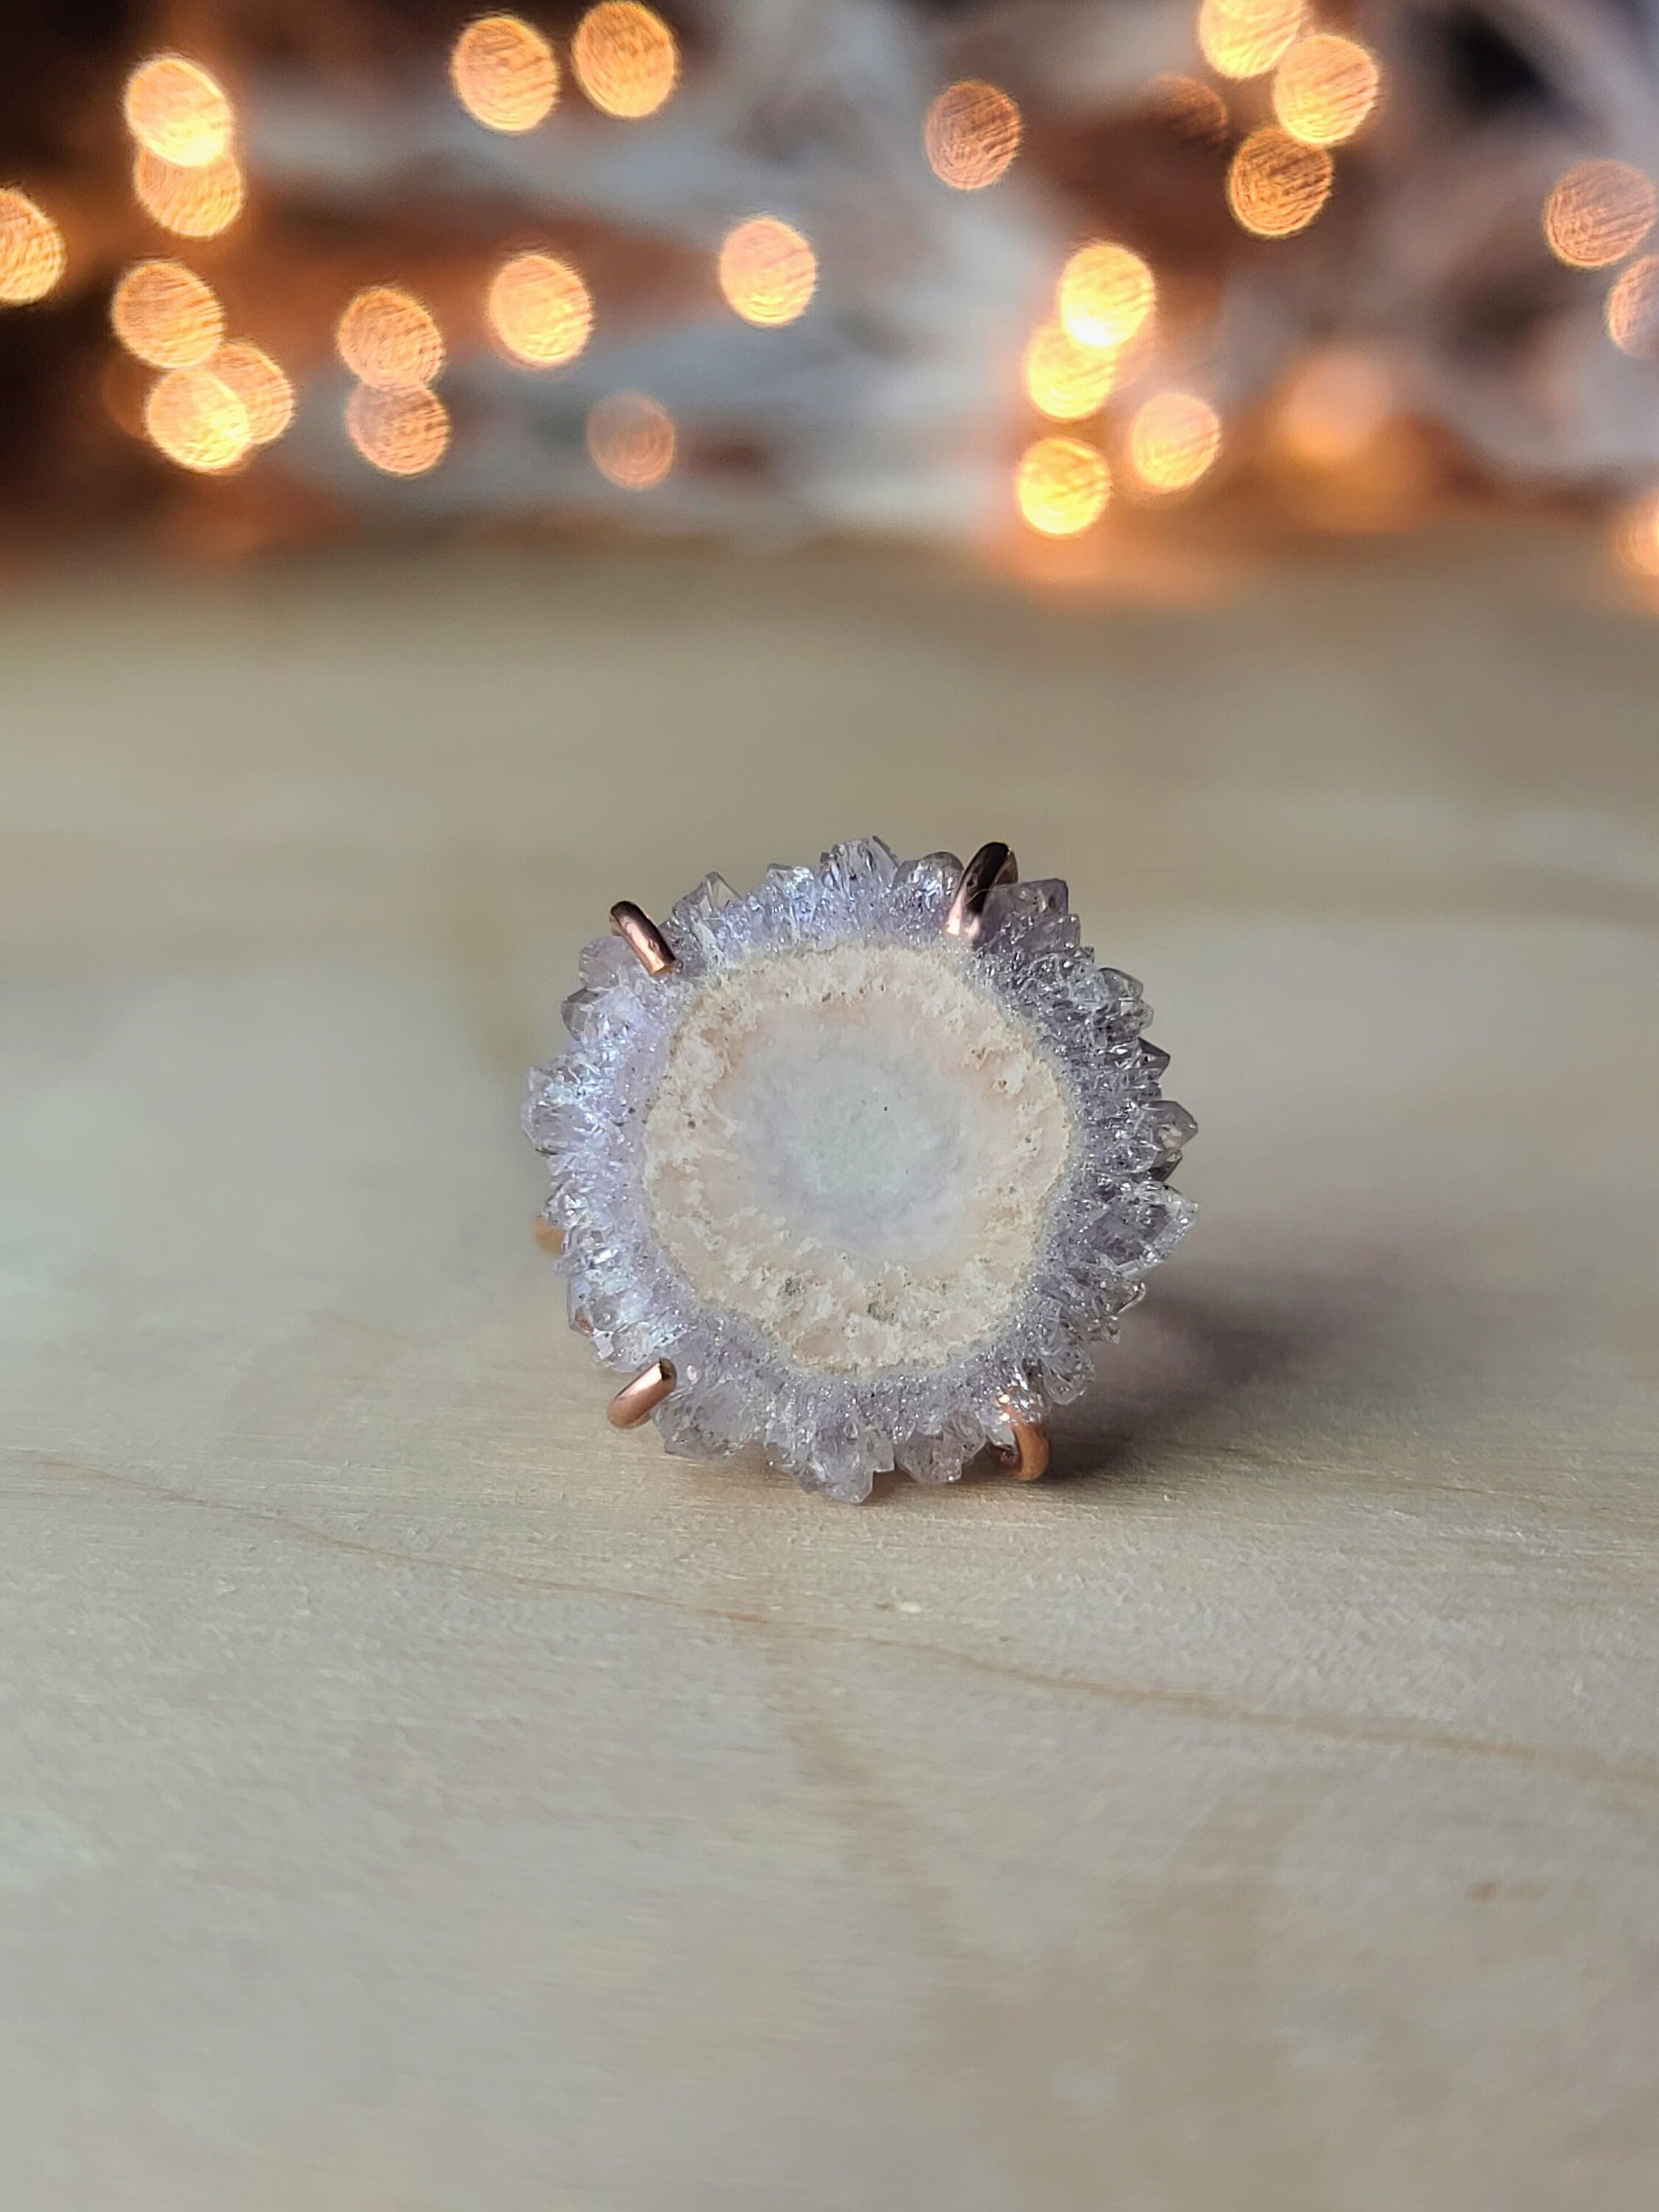 Luxury Crystal Ring, Unique Stalactite Crystal Slice in Pink, Lavender and White, 14K Rose Gold Fill Textured Ring Band with Crystal Slice